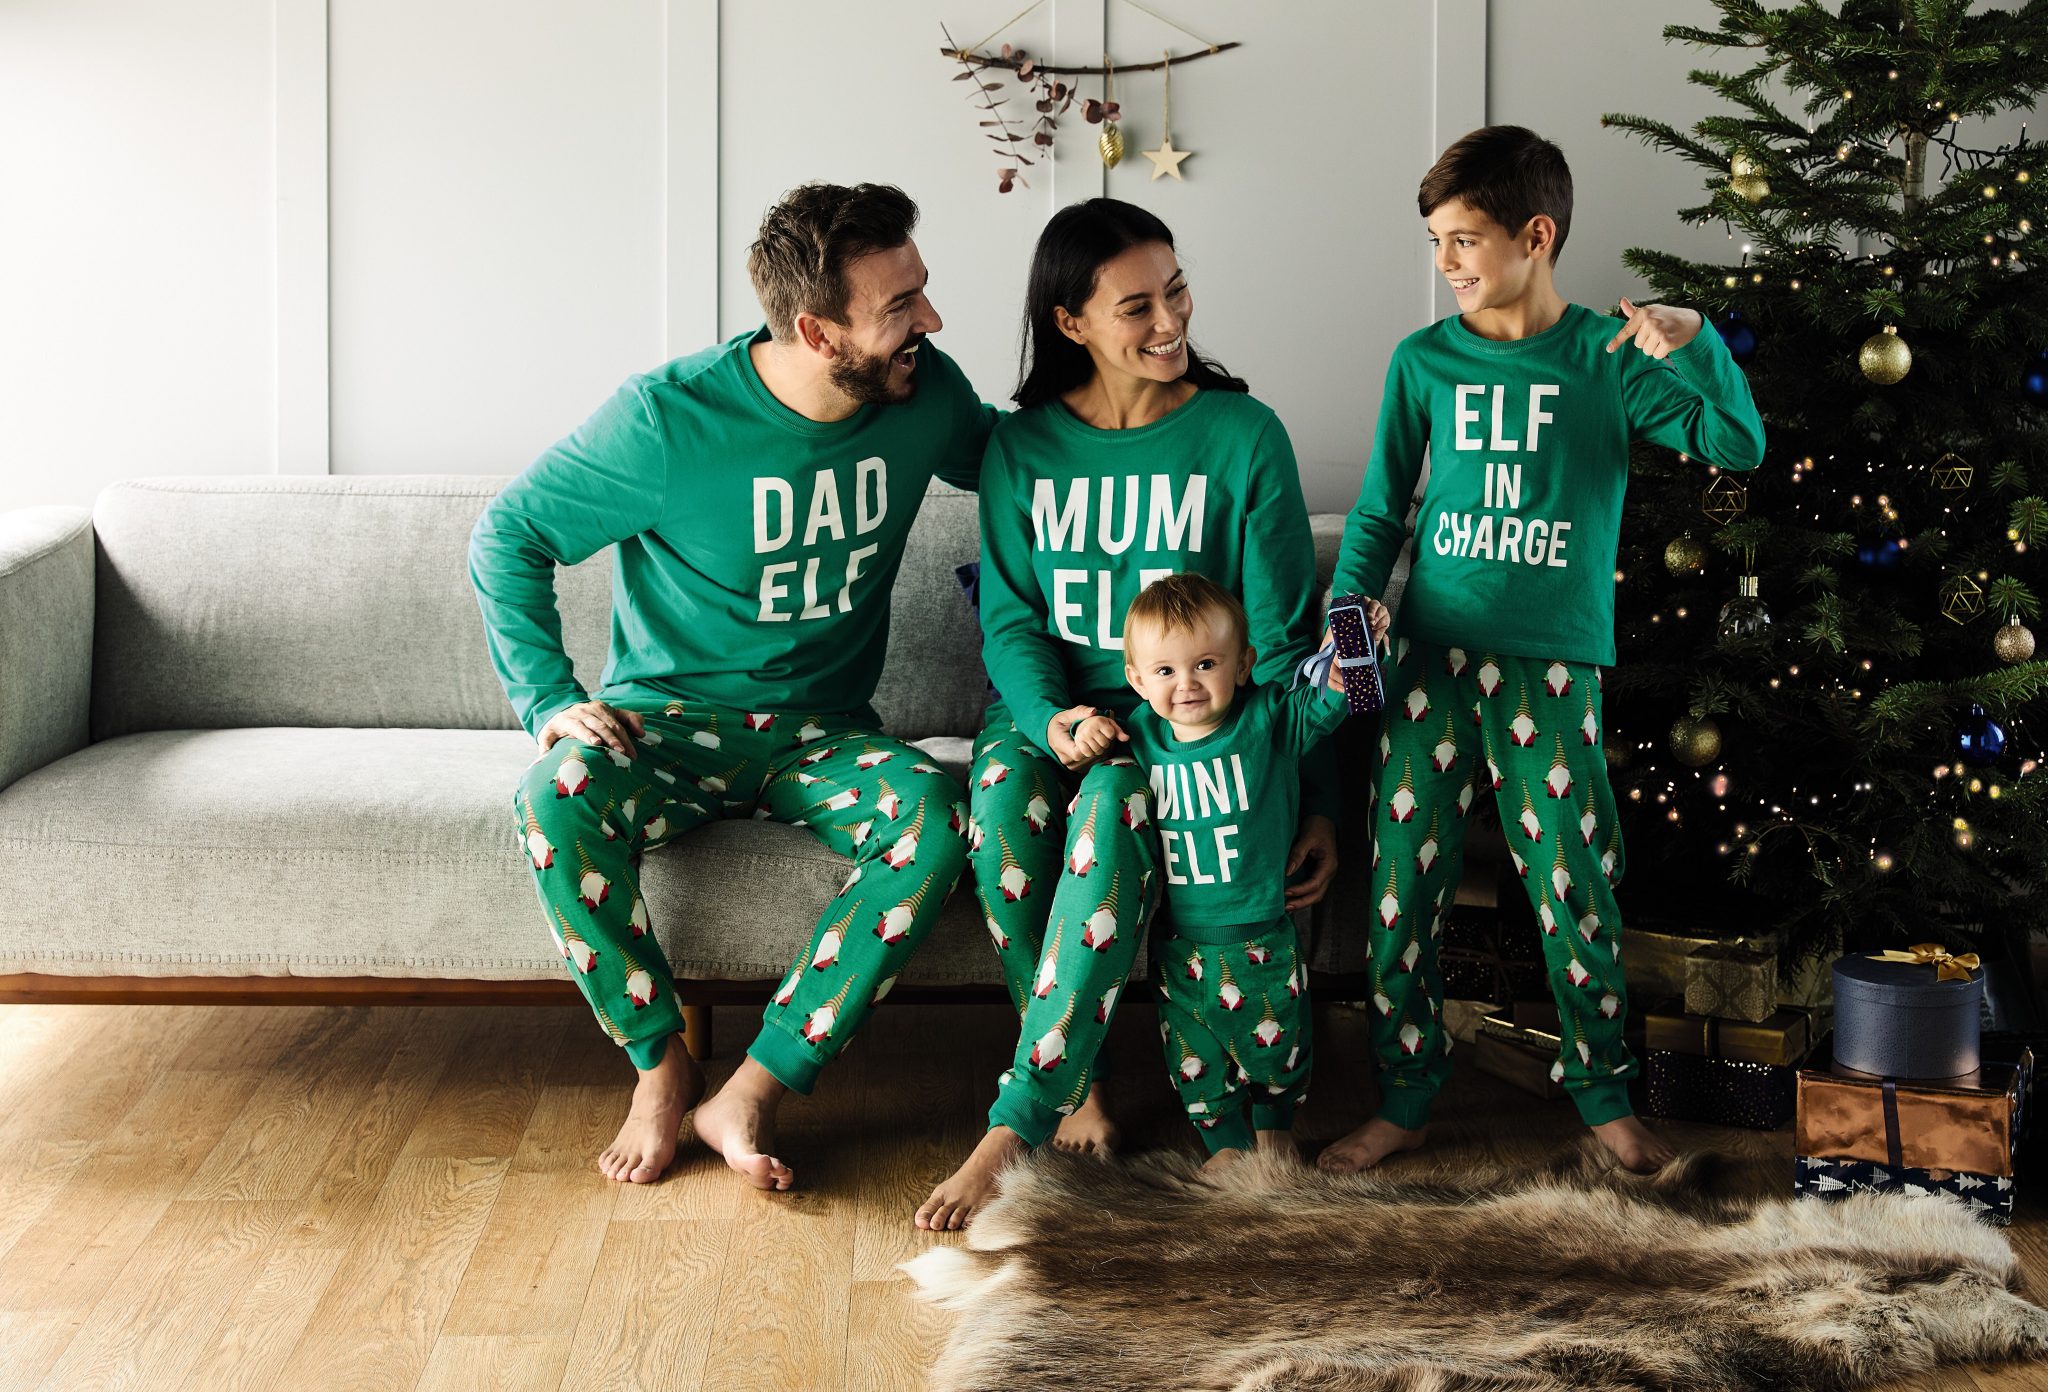 Aldi will be stocking matching family Christmas jammies next week and we need them